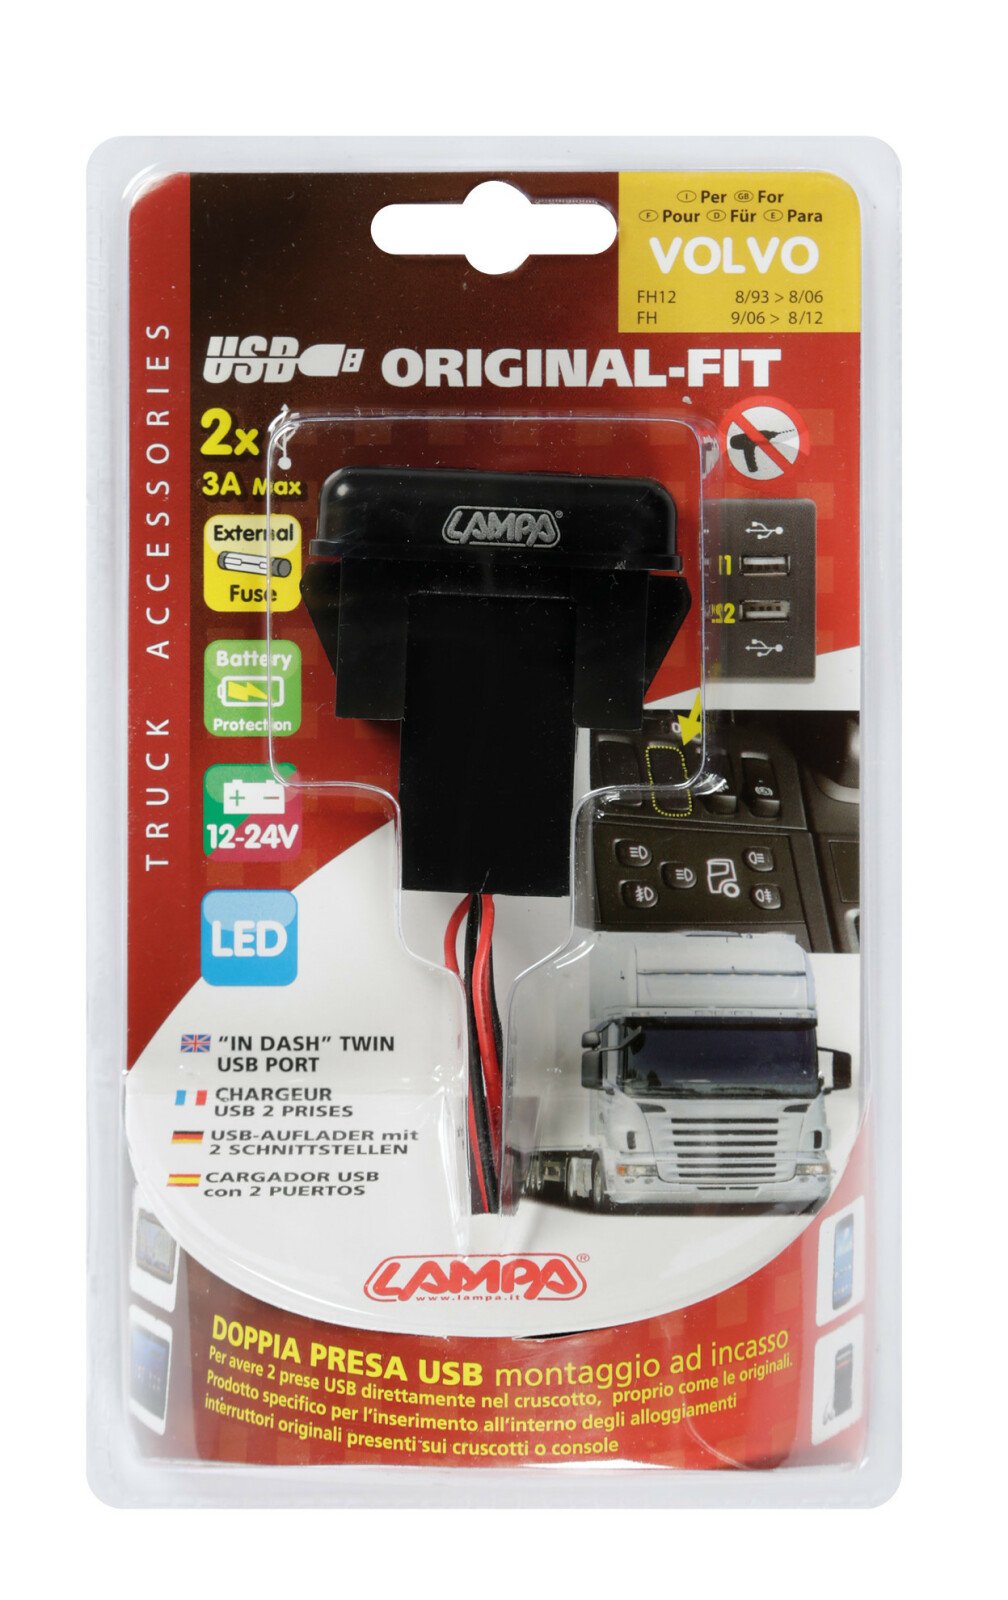 Original-Fit, double USB charger, 12/24V - Volvo thumb